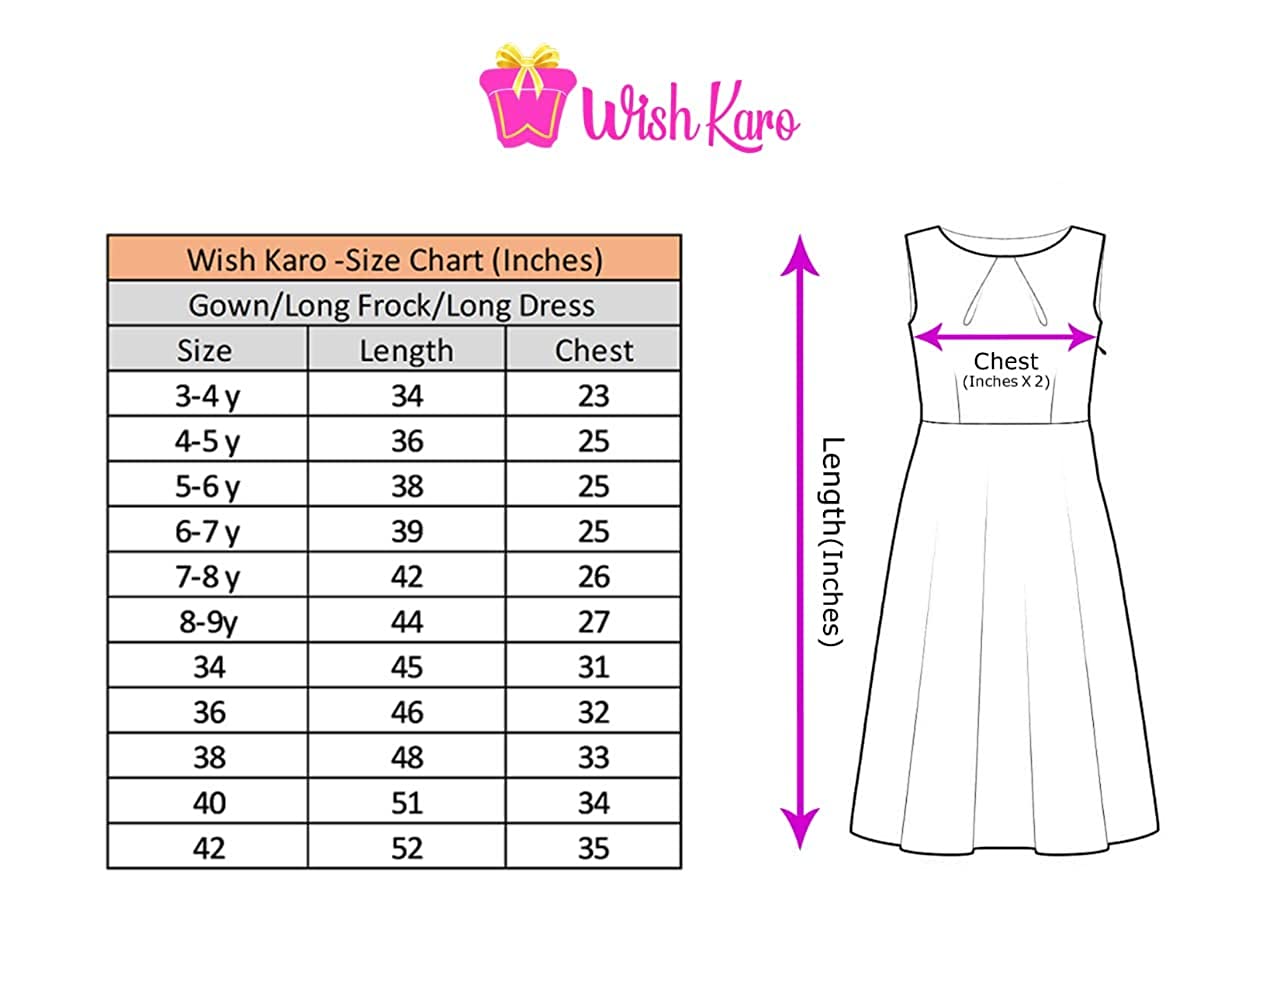 Girls Party Wear Long Dress Birthday Gown for Girls LF144pnk